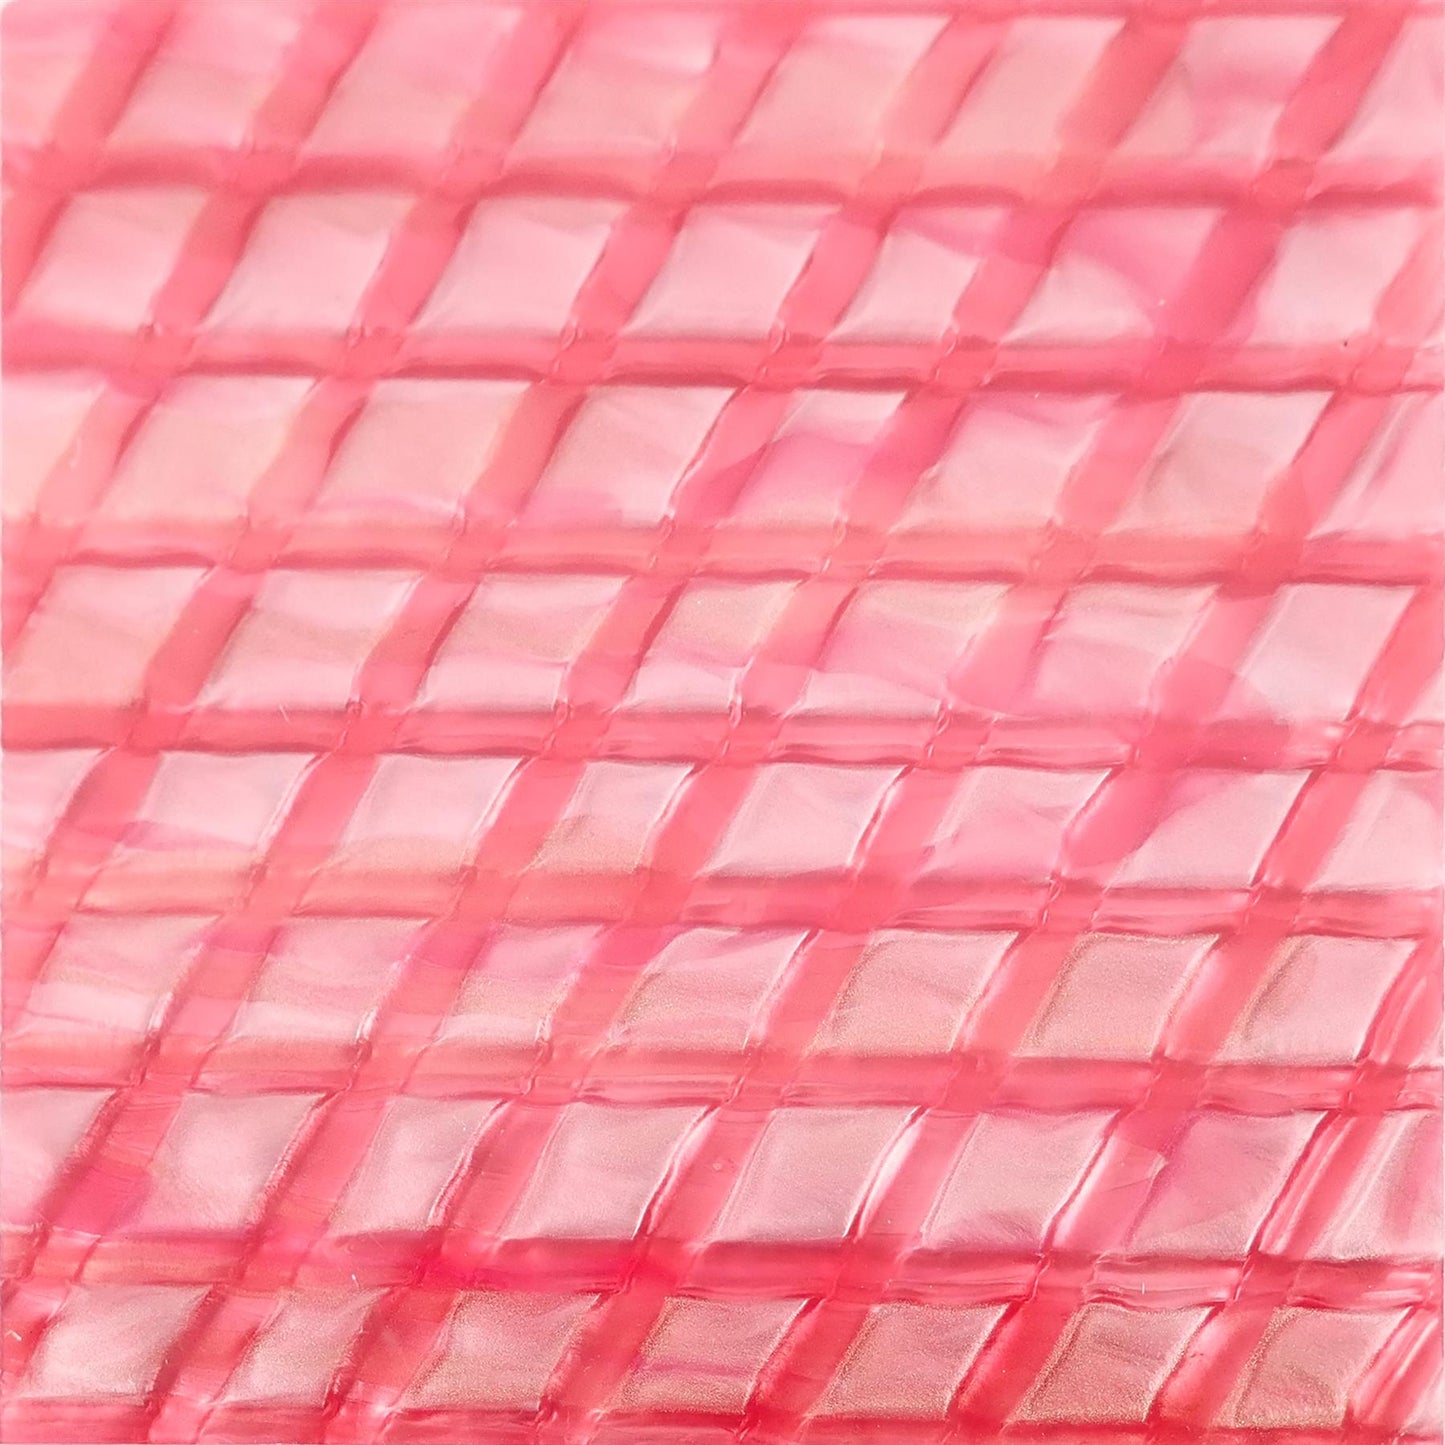 Incudo Red Snakeskin Acrylic Sheet - 400x300x3mm